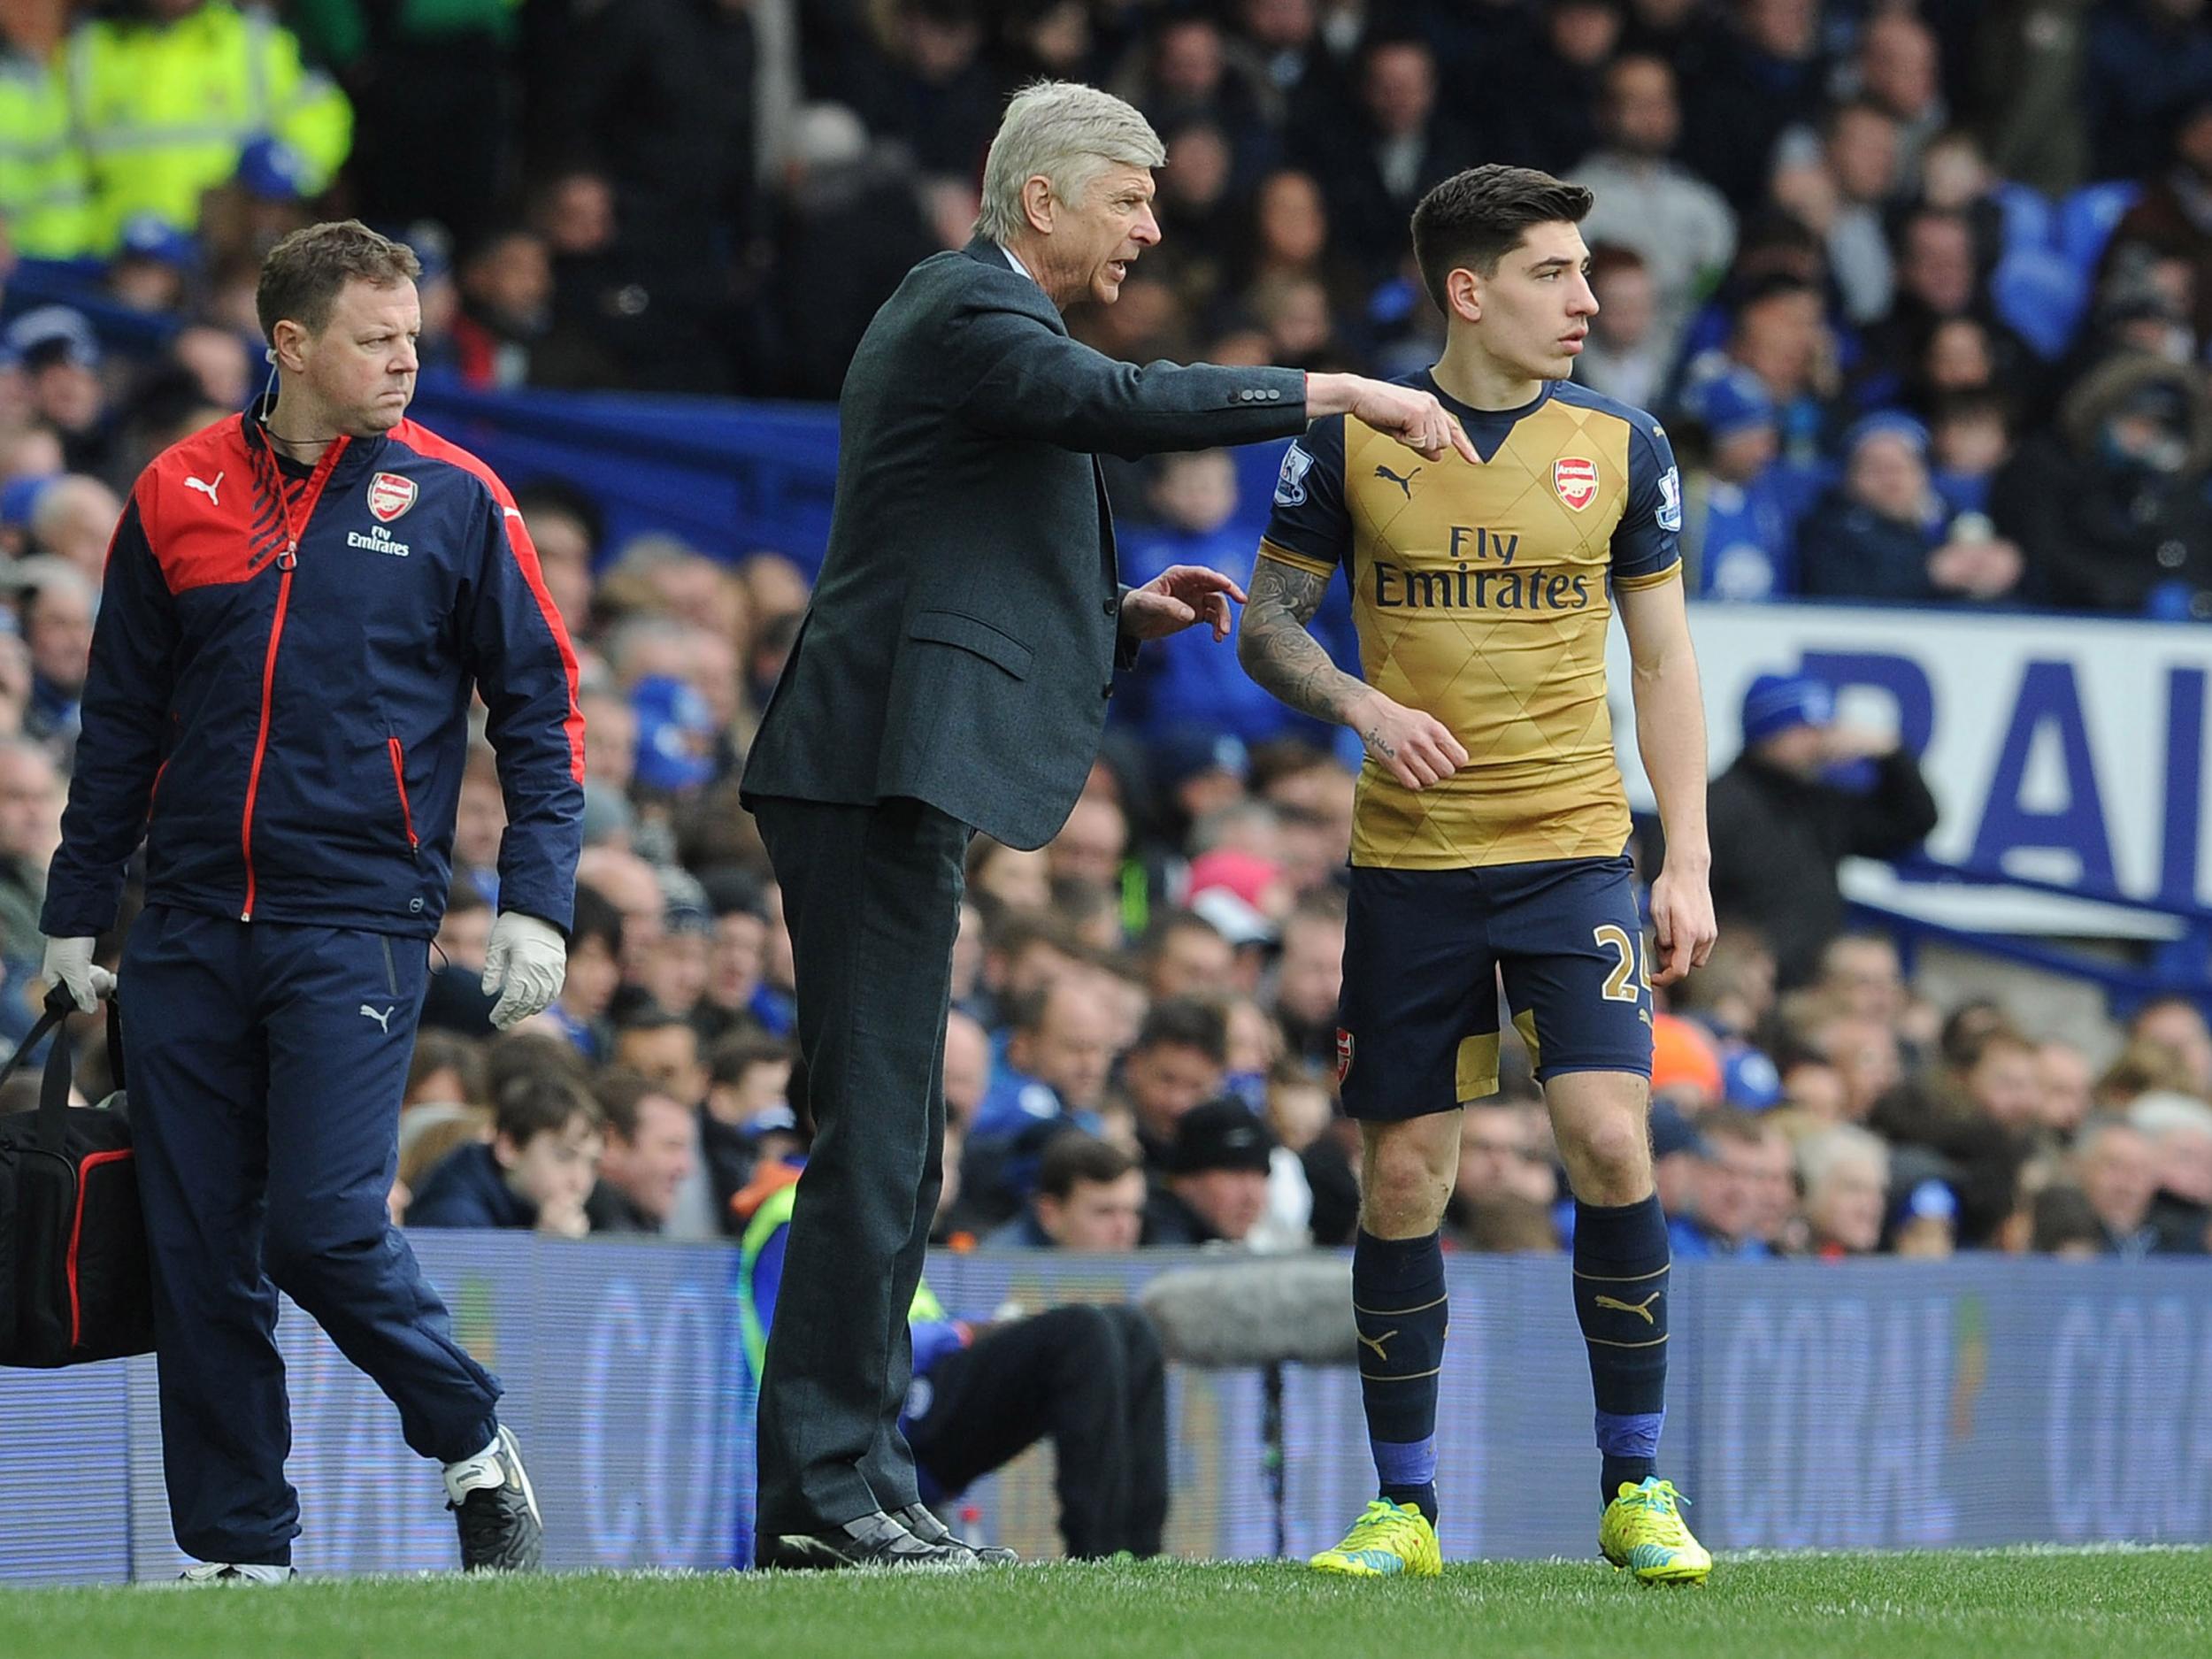 Arsene Wenger, the Arsenal manager, on the side-lines as they beat Everton